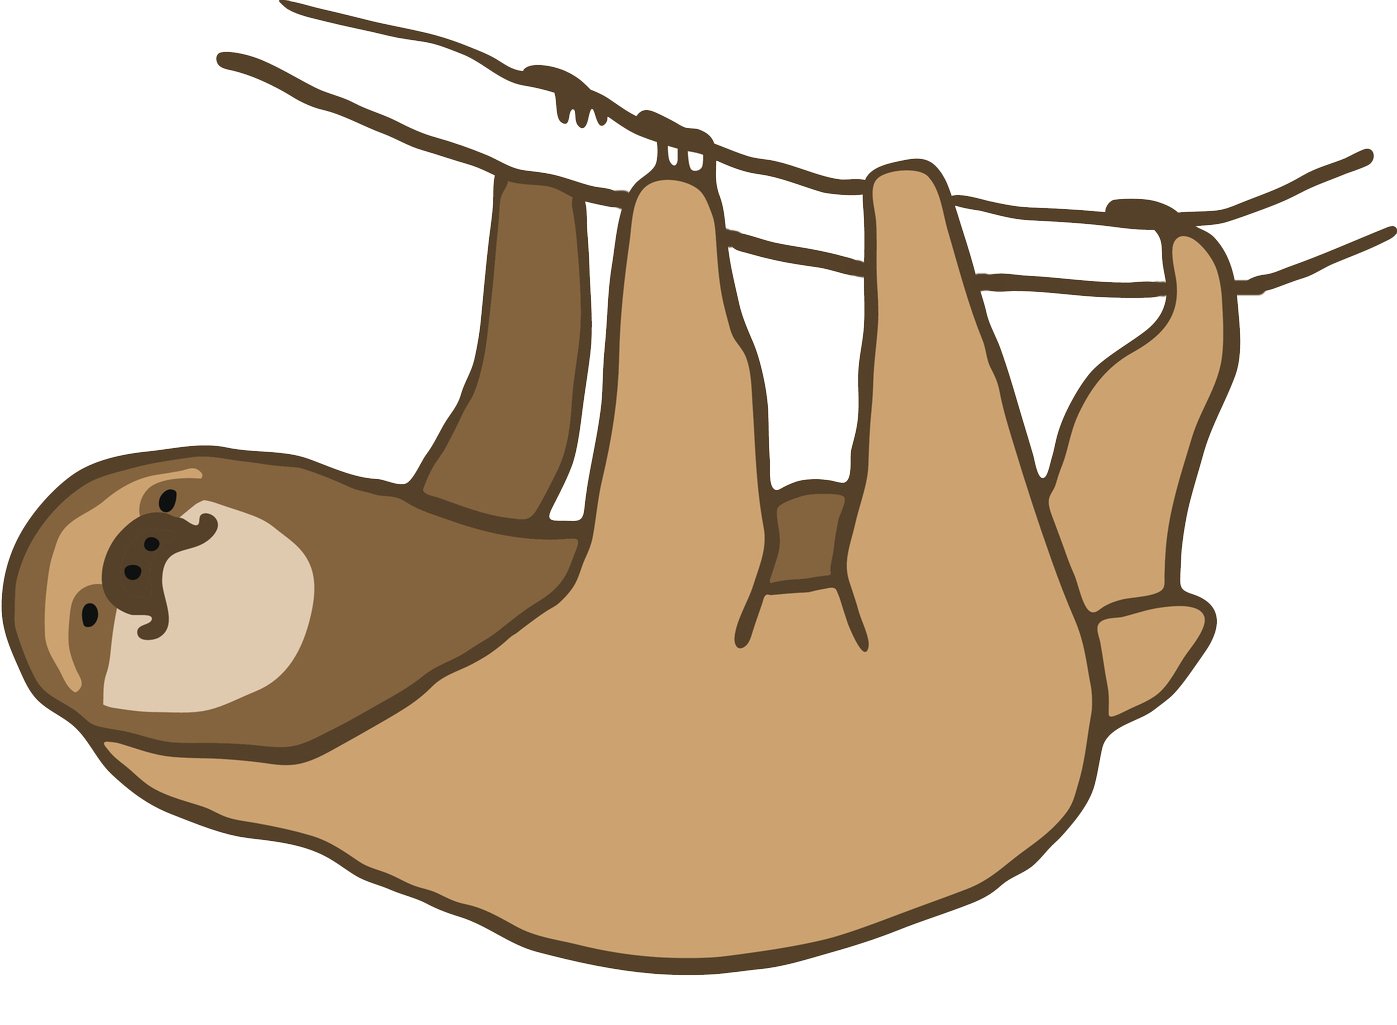  Easy Sloth Drawing Free download on ClipArtMag